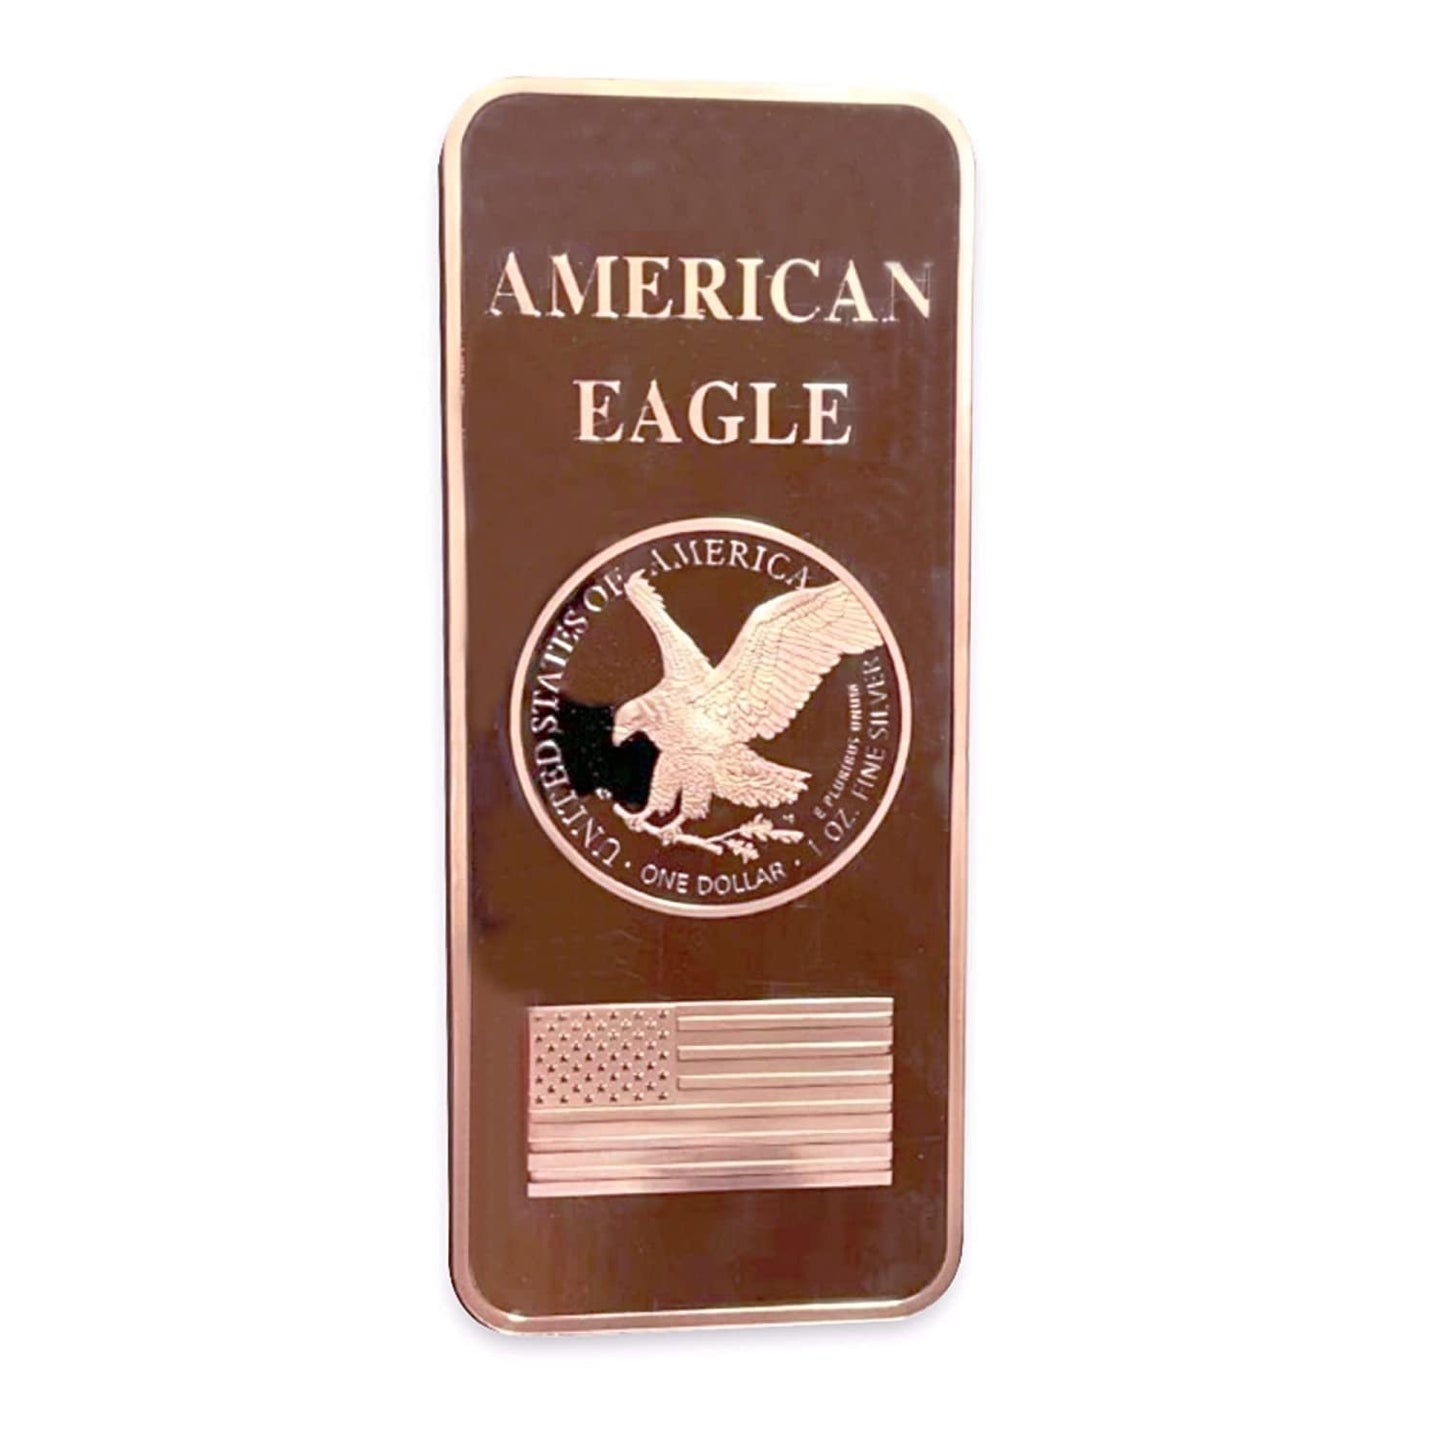 1 LB Troy Ounce/OZ .999 Pure American Metal Walking Liberty Eagle BAR Gold Copper Silver Precious Metals Pound Paperweight Pure Element CU Chemistry